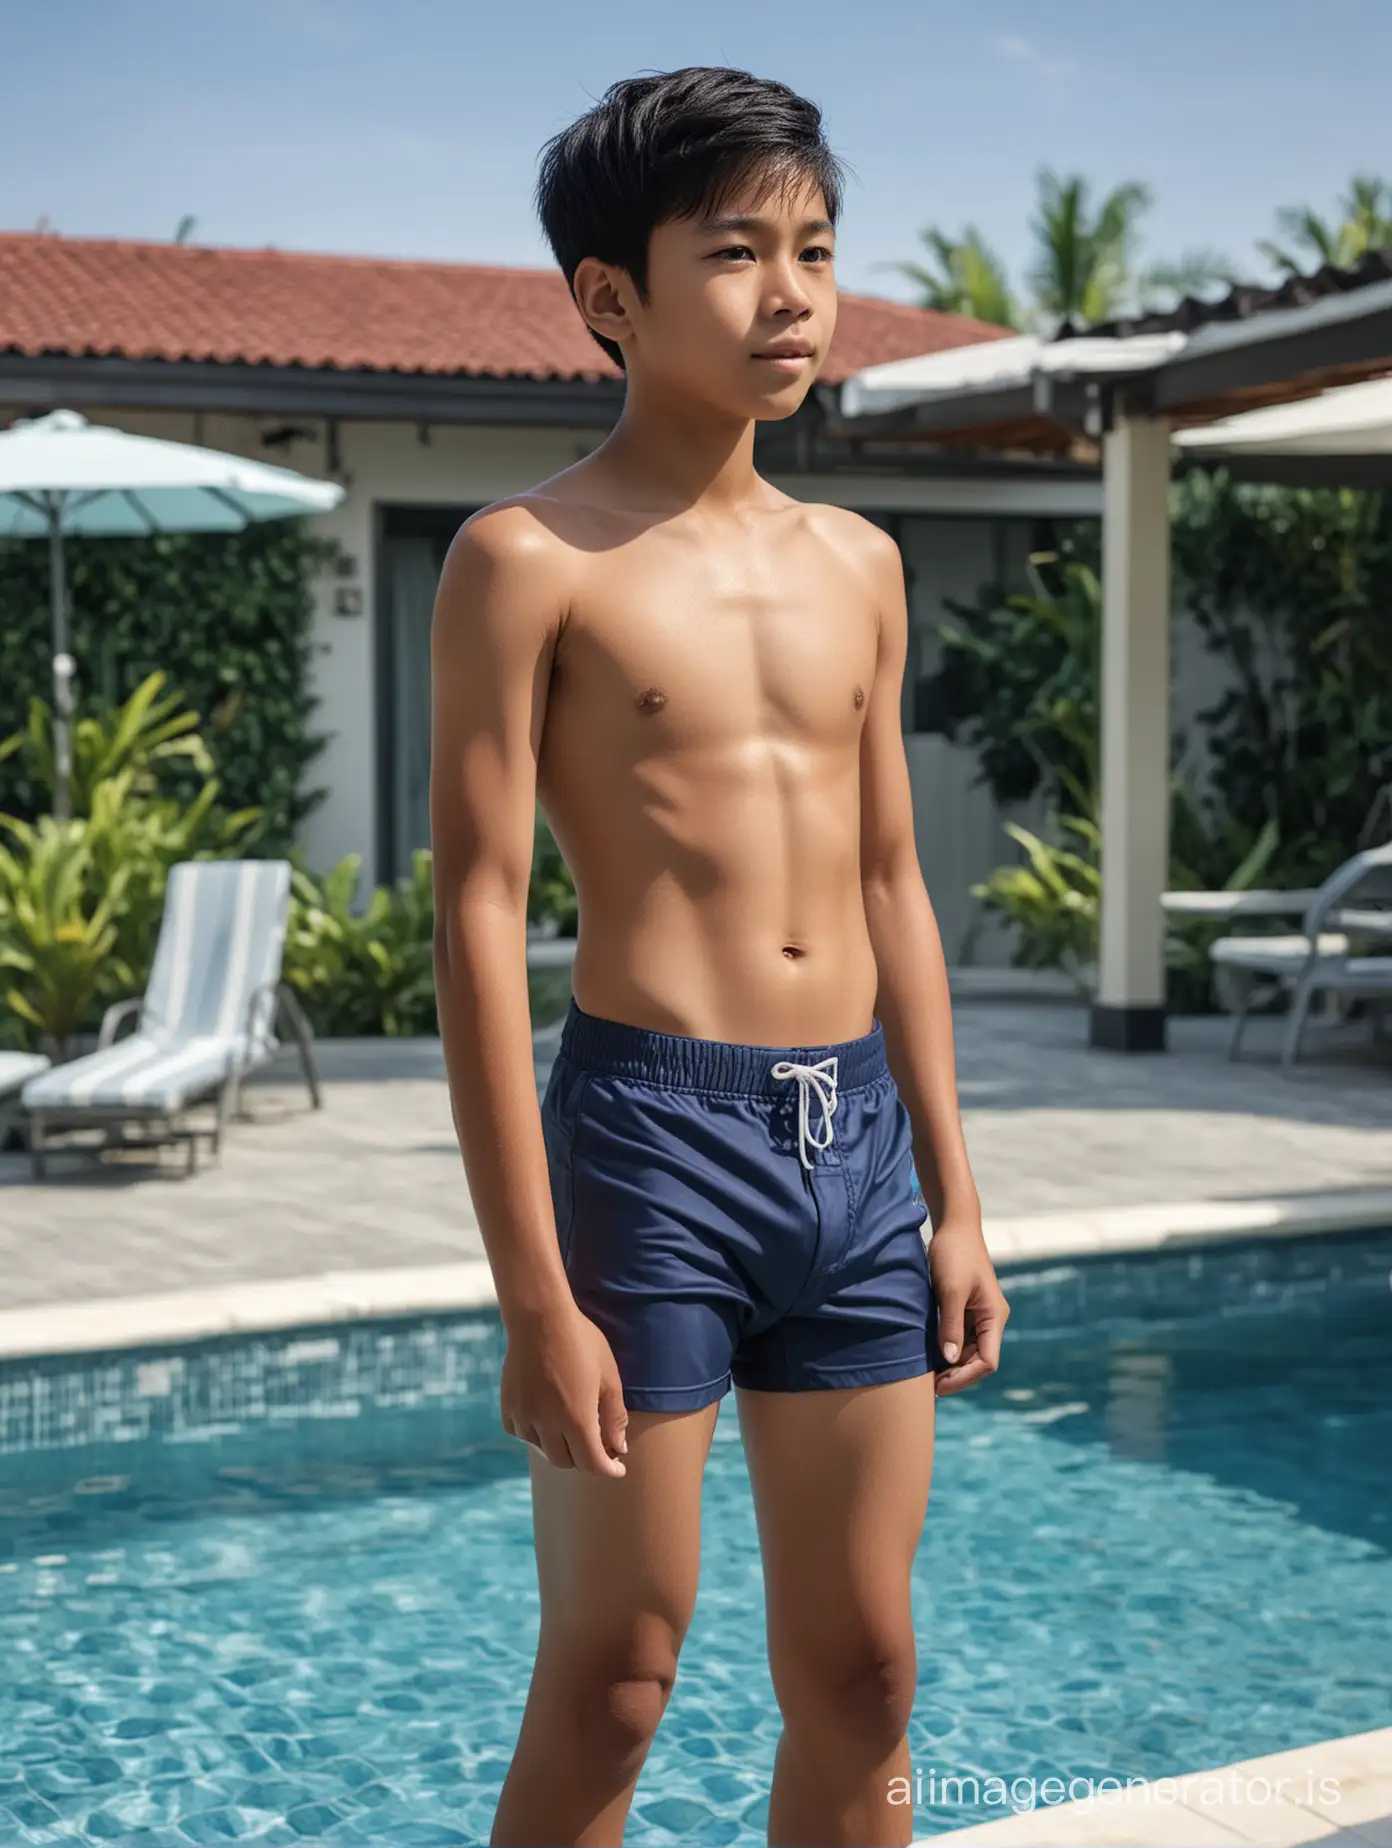 Handsome-Indonesian-Boy-Posing-by-Indoor-Swimming-Pool-in-Blue-Boxer-Briefs-Ultra-Realistic-8K-UHD-Image